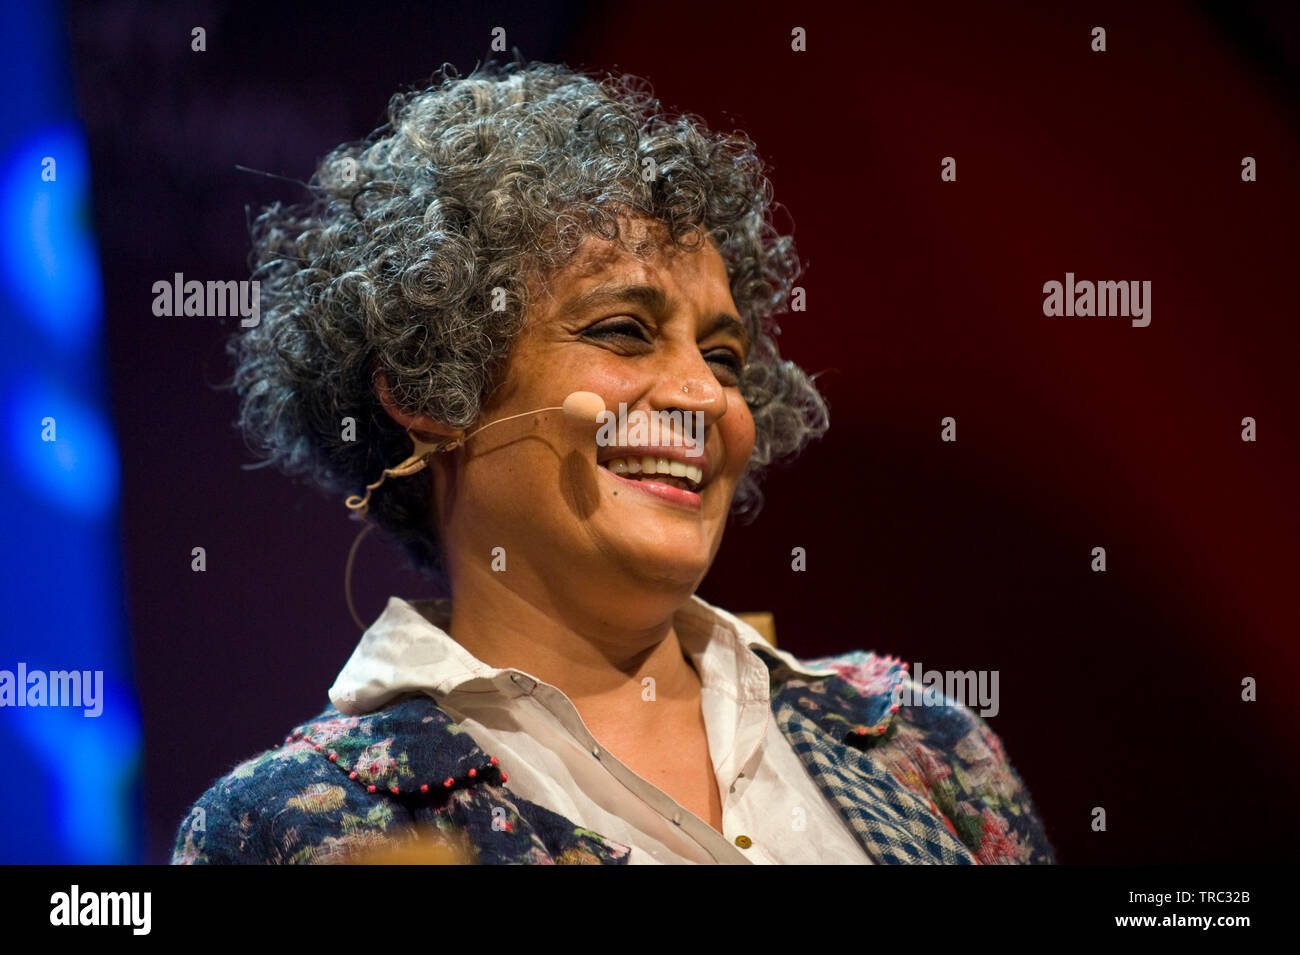 Arundhati Roy Indian author pictured at Hay Festival Hay on Wye Powys Wales UK Stock Photo